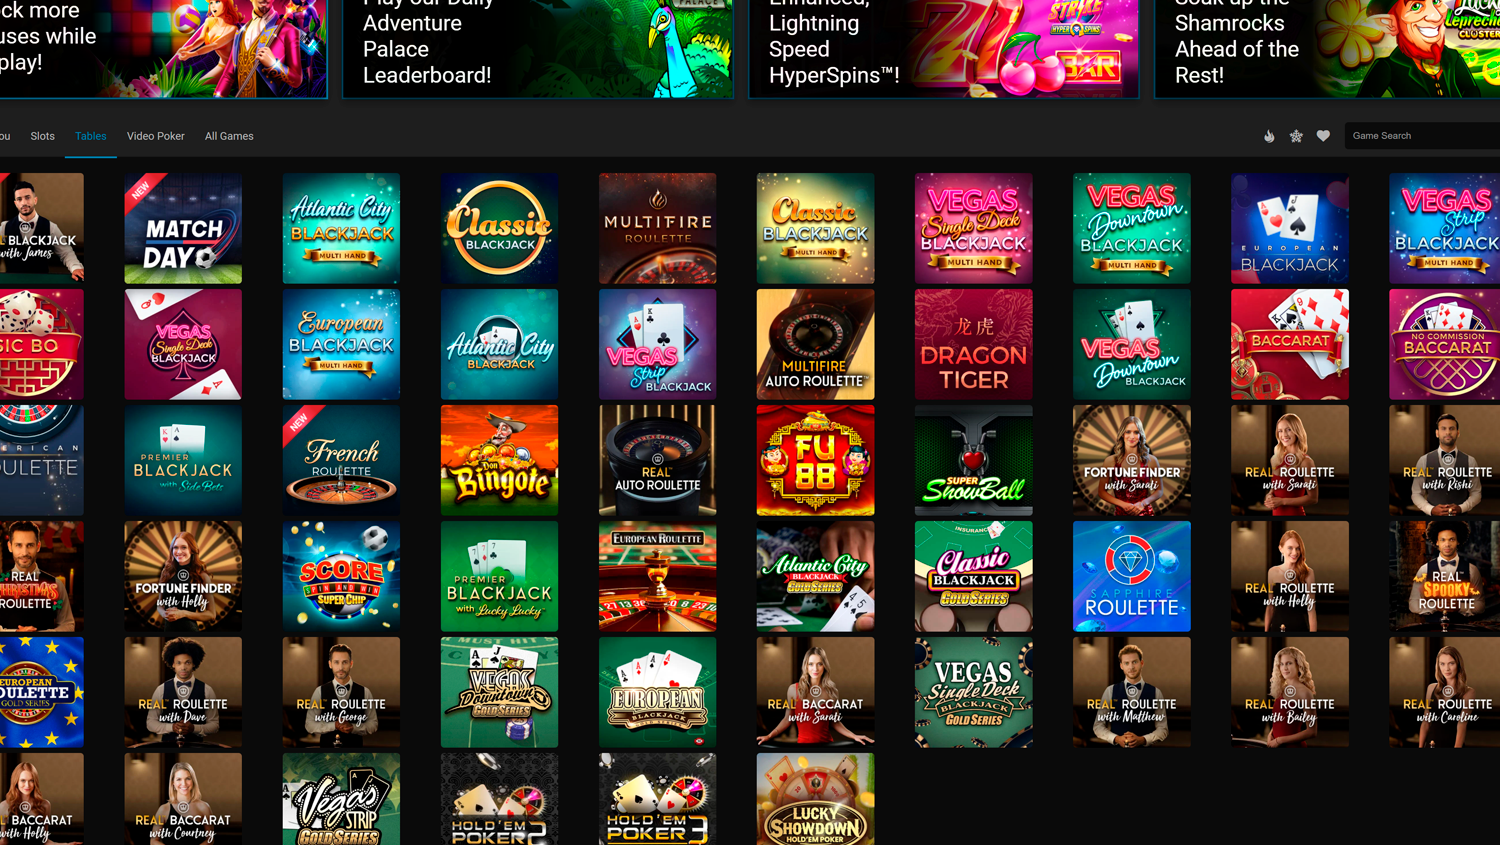 Table games page on Spin Palace Casino site